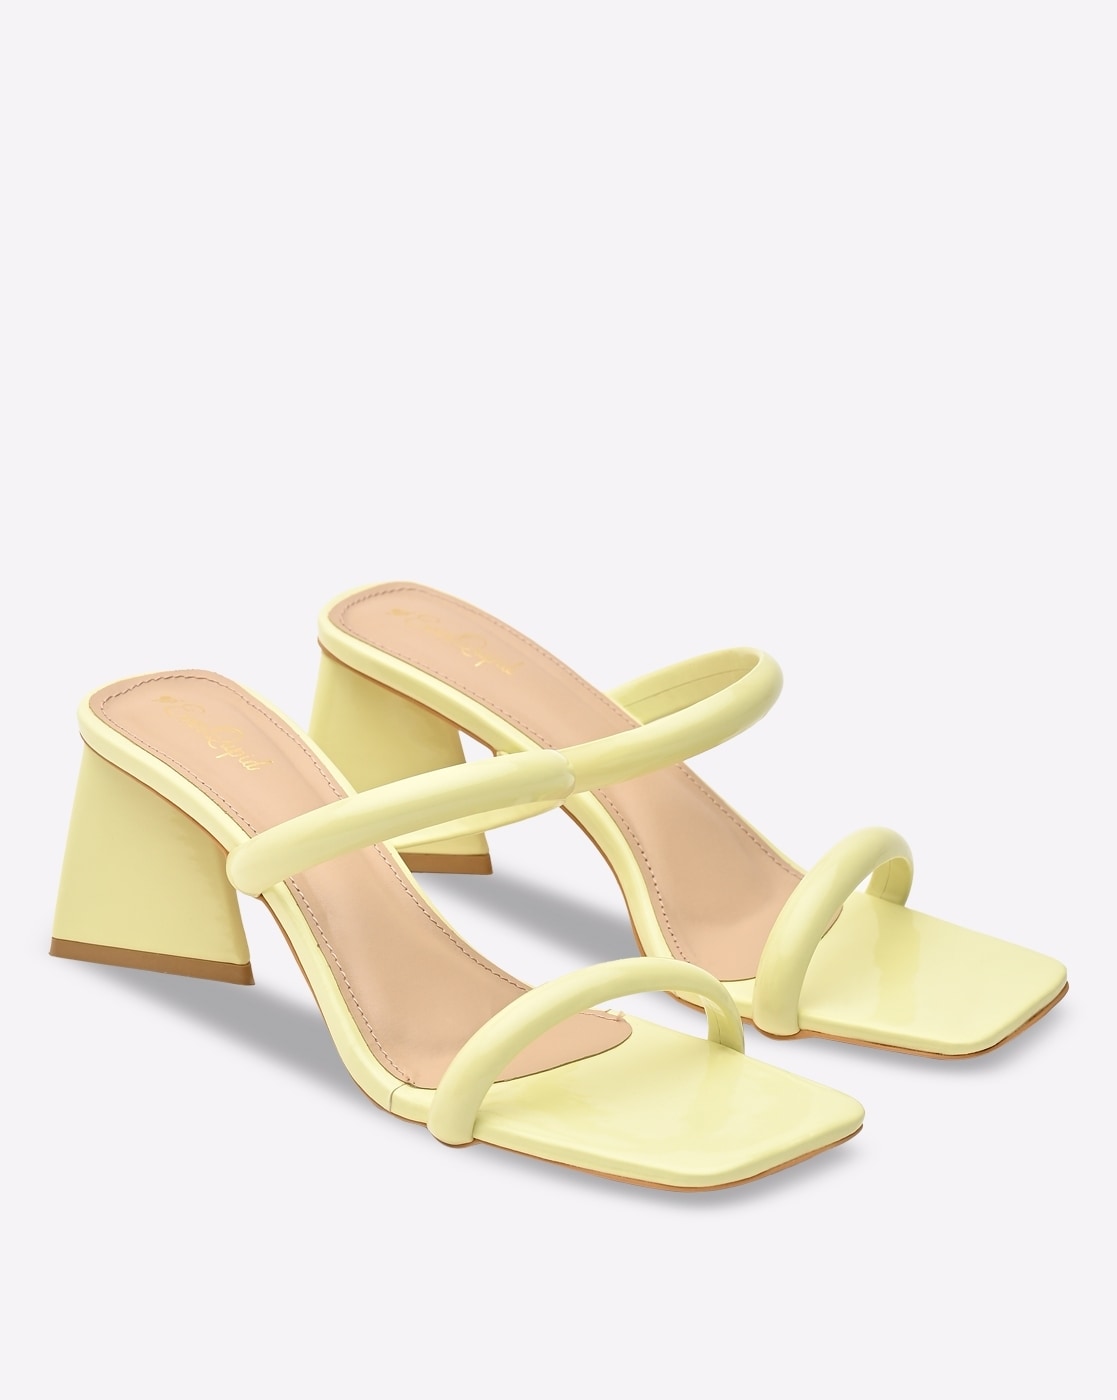 Loubigirl - 85 mm Sandals - Nappa leather - Yellow Queen - Women -  Christian Louboutin United States